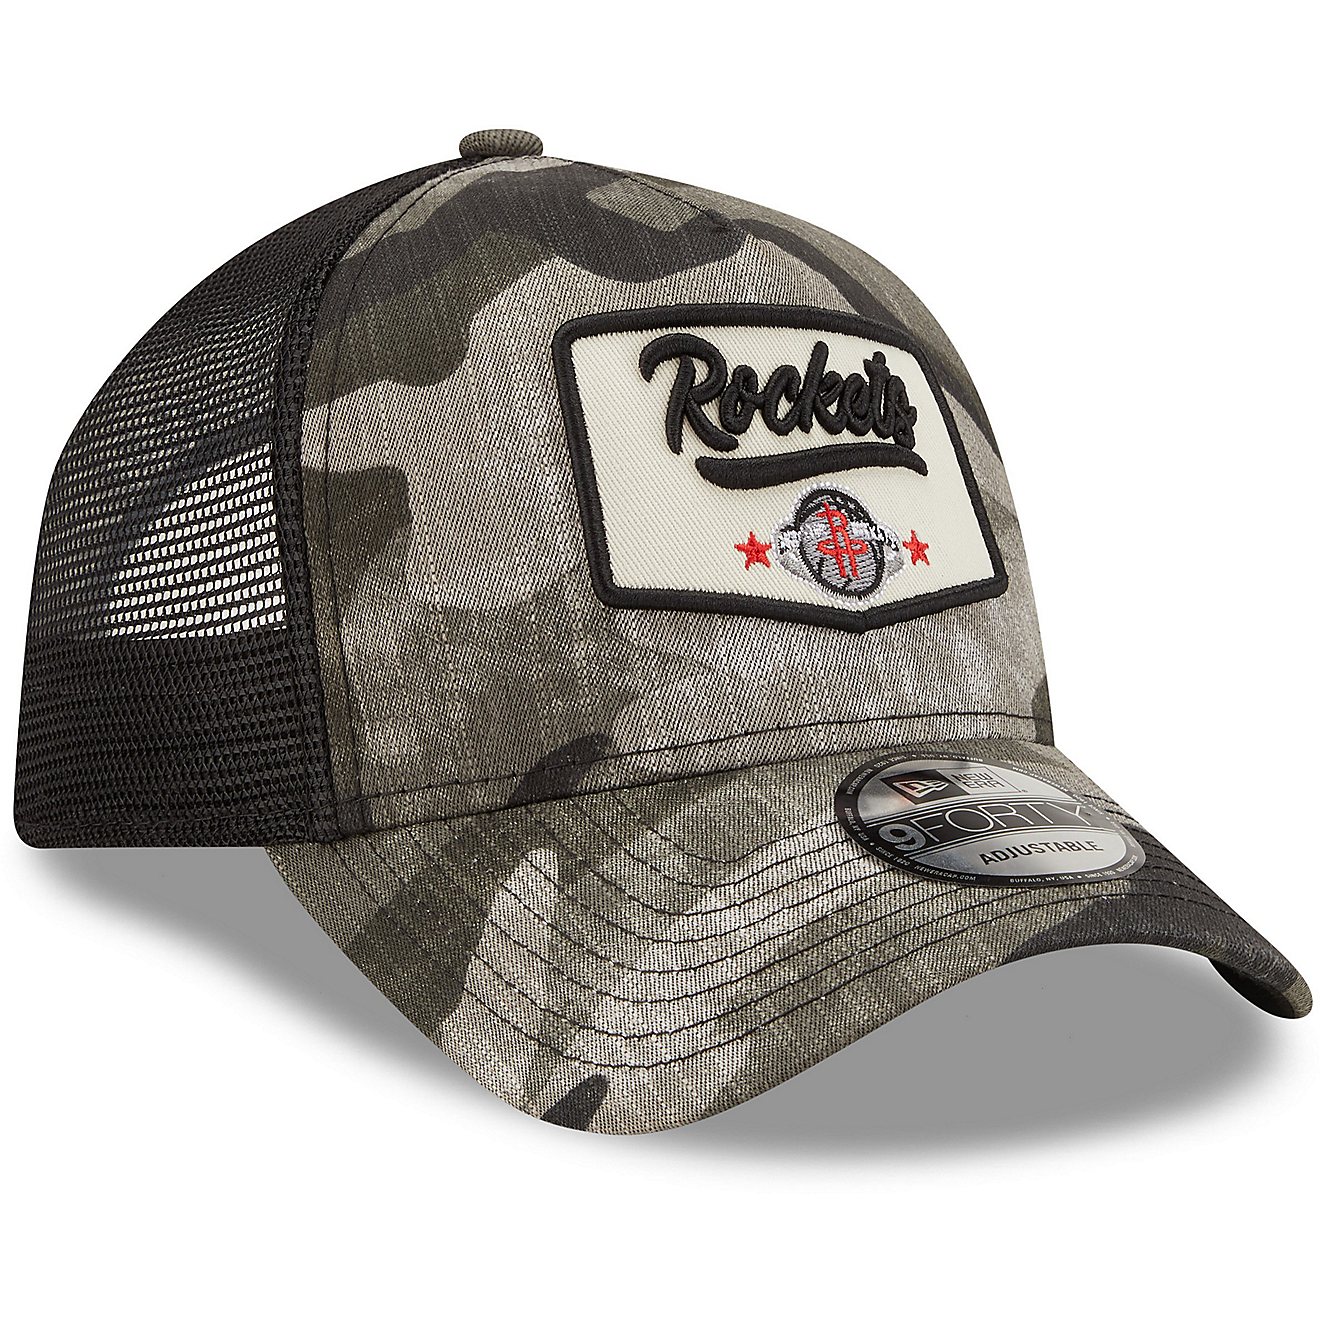 New Era Men's Houston Rockets Camo Patch 9FORTY Cap                                                                              - view number 4